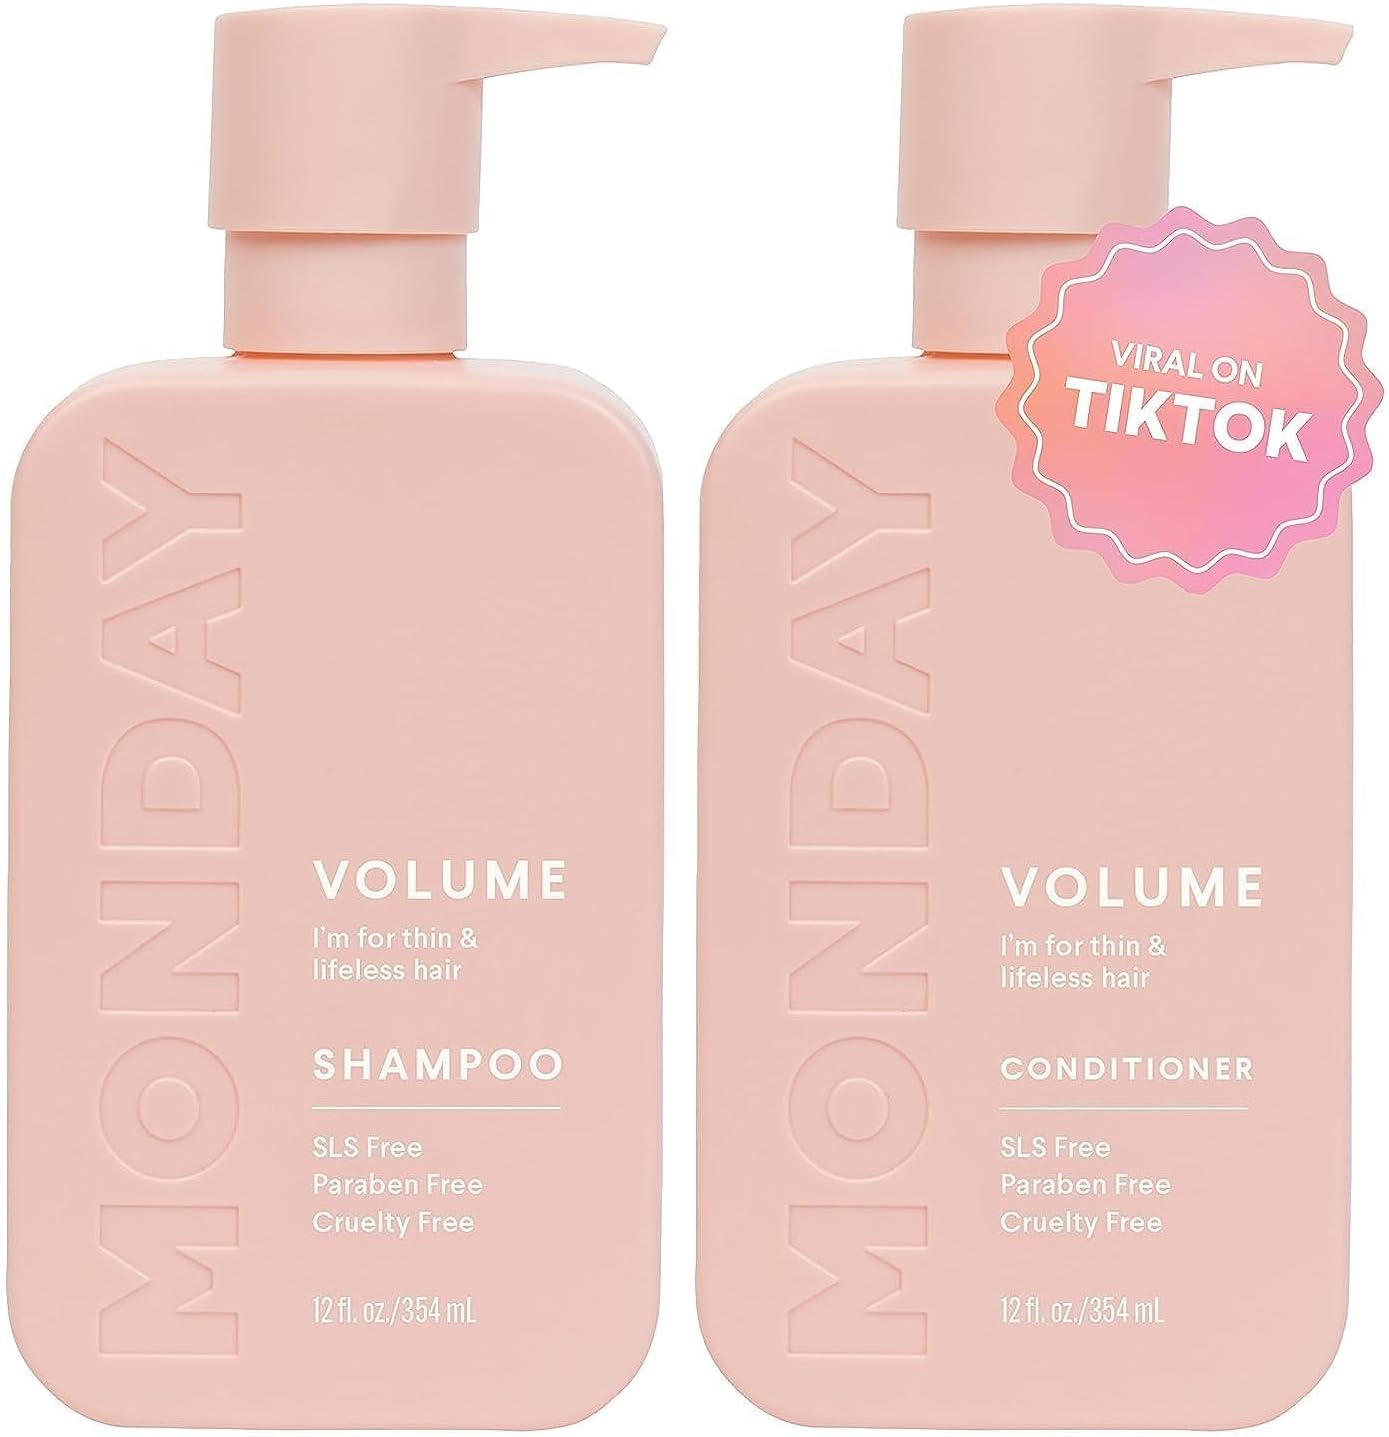 Monday Haircare Volume Shampoo Conditioner Set Review Beauty And Health 